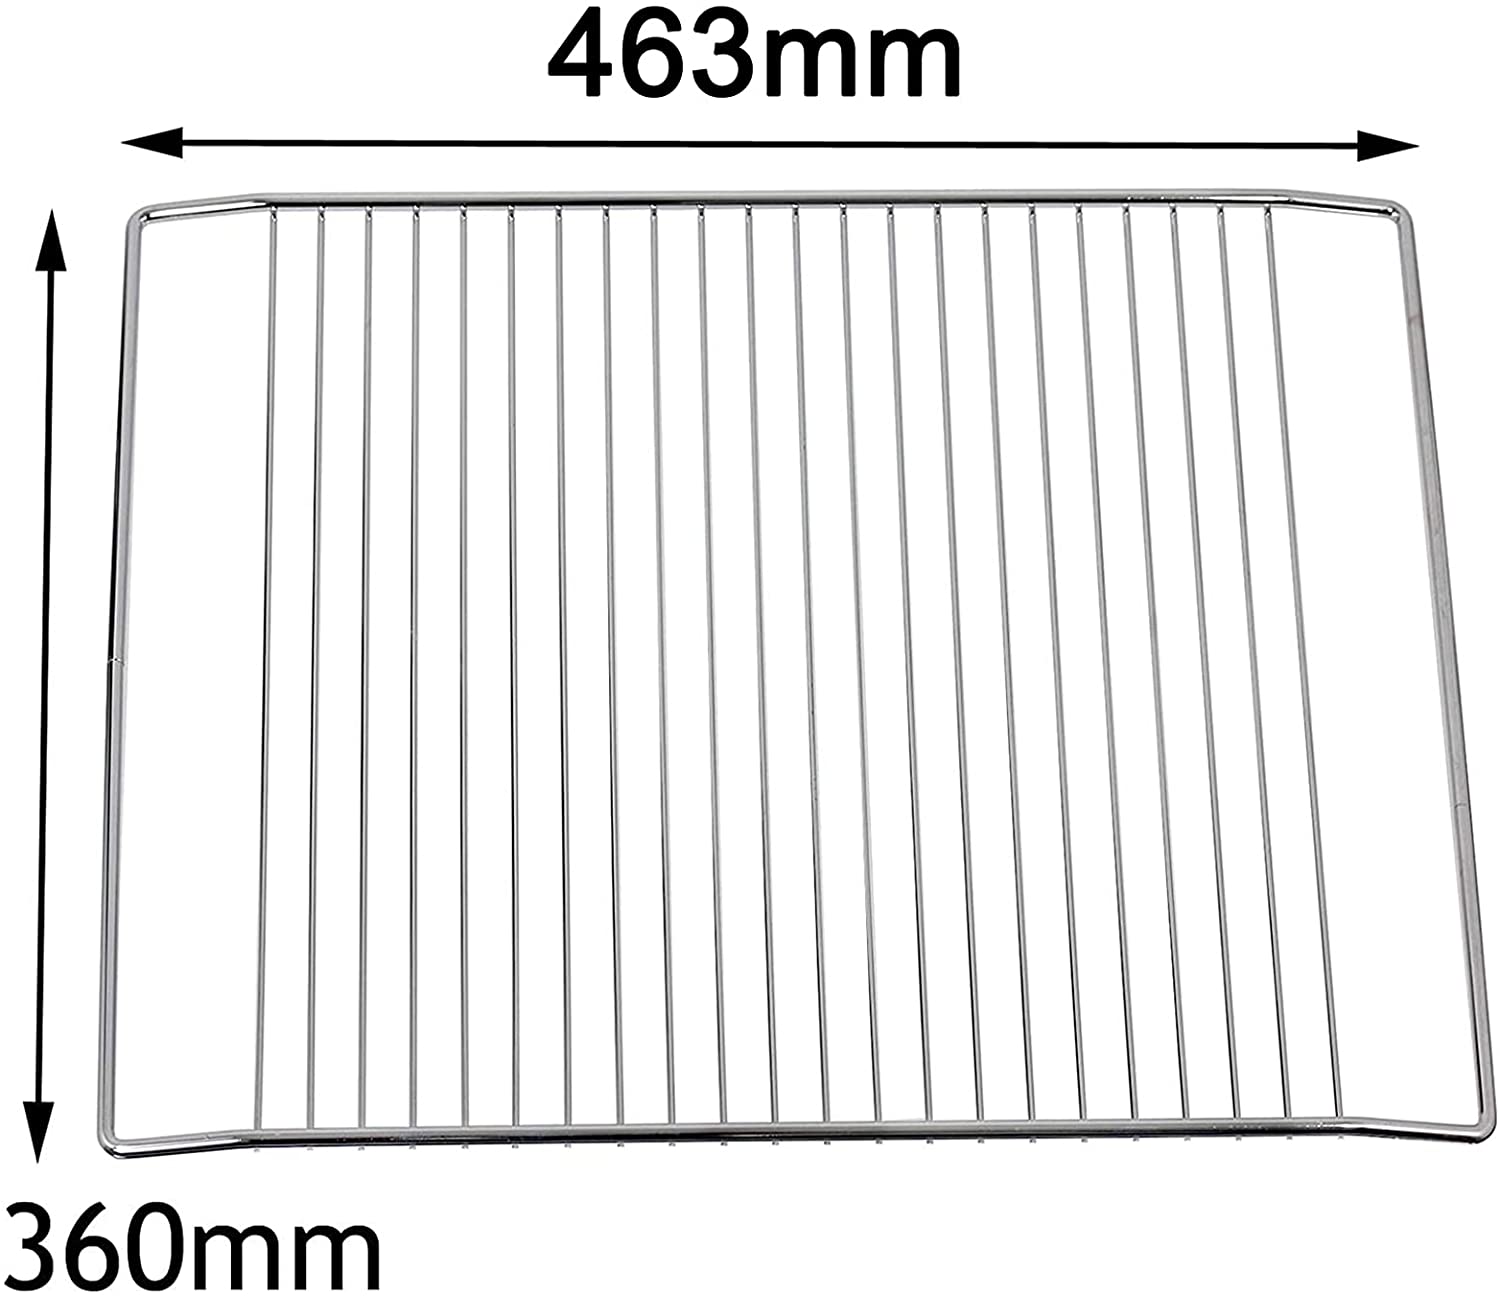 Wire Shelf Rack for Blomberg Oven Cooker Grill 463 x 360 mm 2 x Shelves